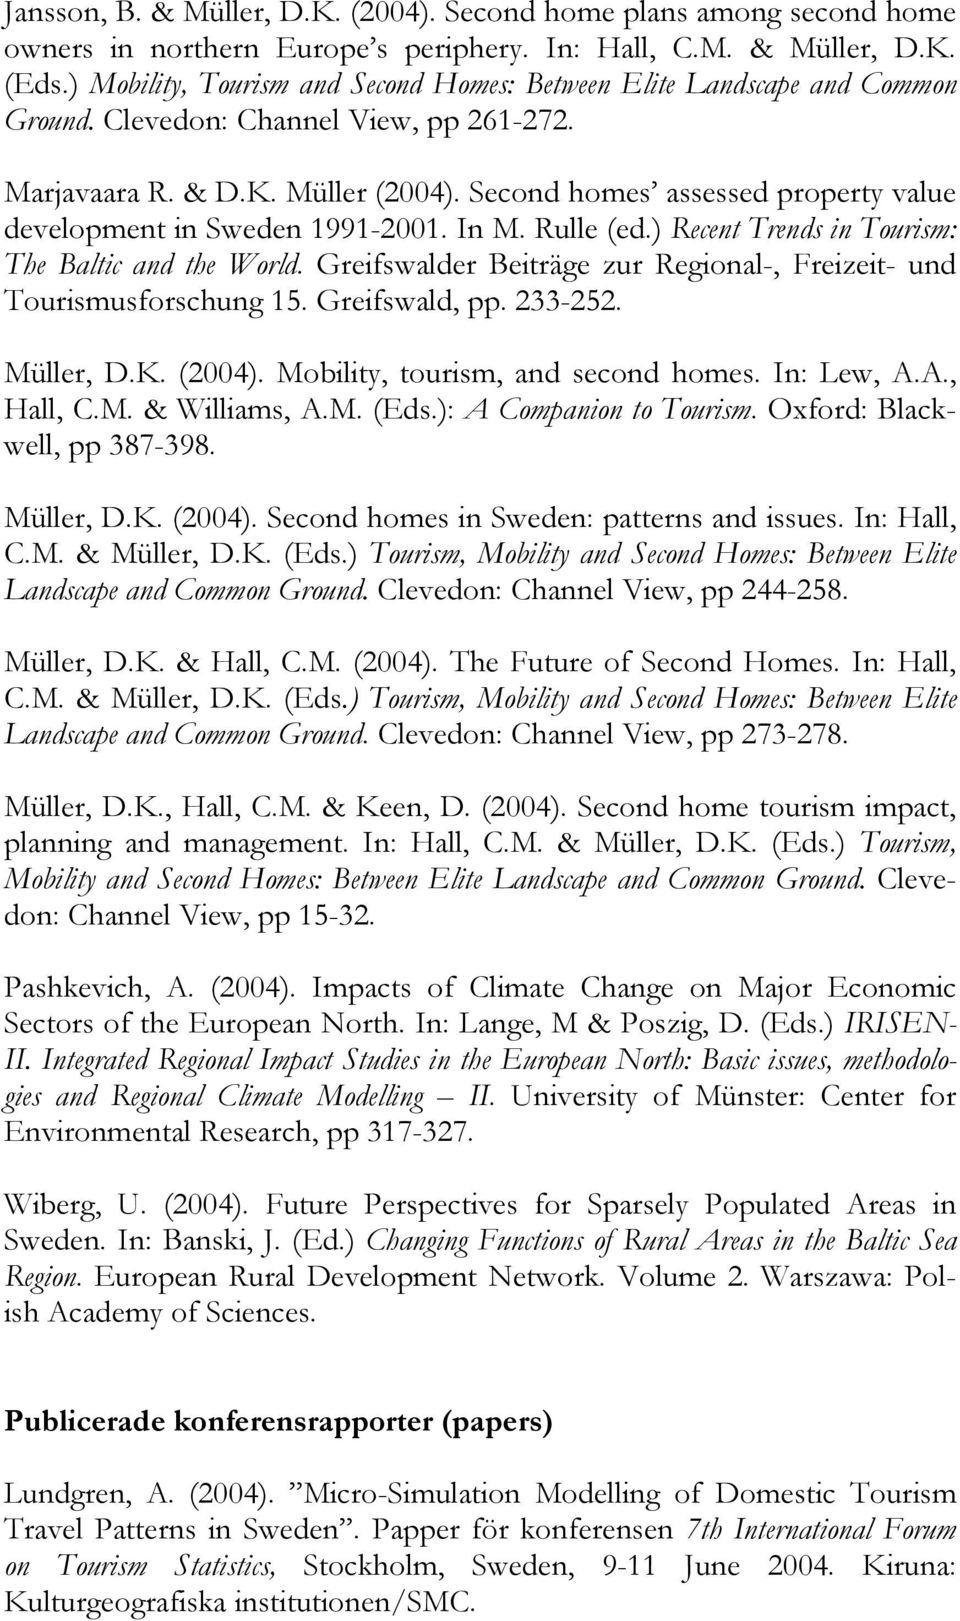 Second homes assessed property value development in Sweden 1991-2001. In M. Rulle (ed.) Recent Trends in Tourism: The Baltic and the World.